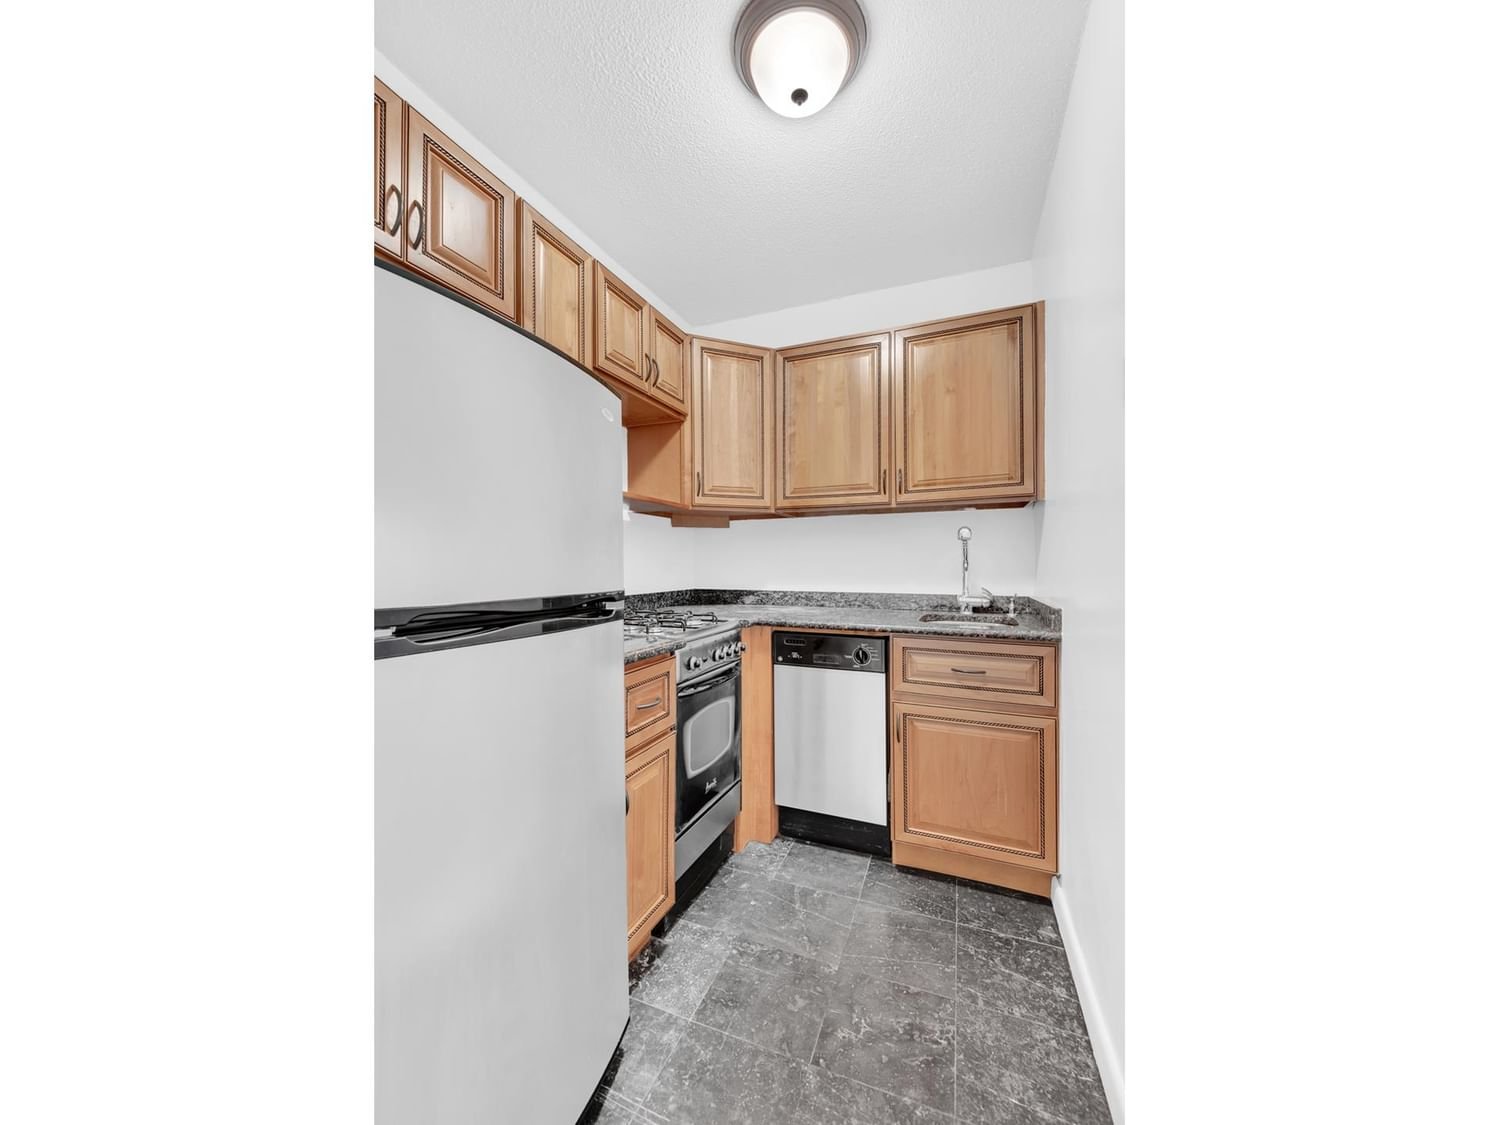 Real estate property located at 520 81st #2K, New York, New York City, NY